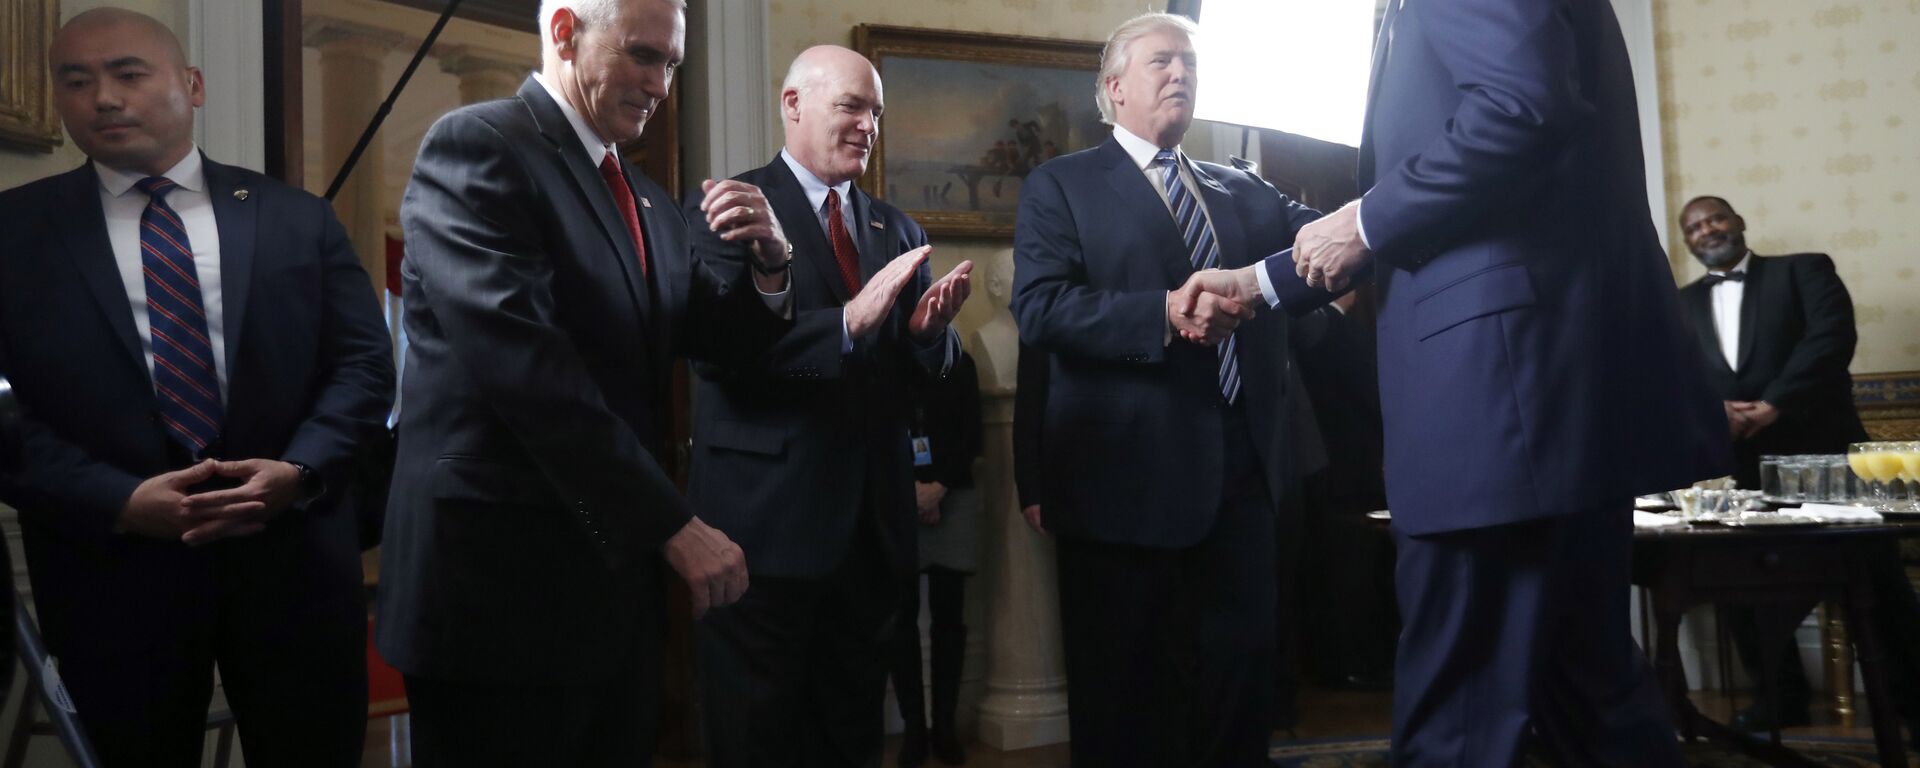 Vice President Mike Pence, second from left, and Secret Service Director Joseph Clancy stand as President Donald Trump shakes hands with FBI Director James Comey during a reception for inaugural law enforcement officers and first responders in the Blue Room of the White House, Sunday, Jan. 22, 2017 in Washington - Sputnik International, 1920, 01.12.2021